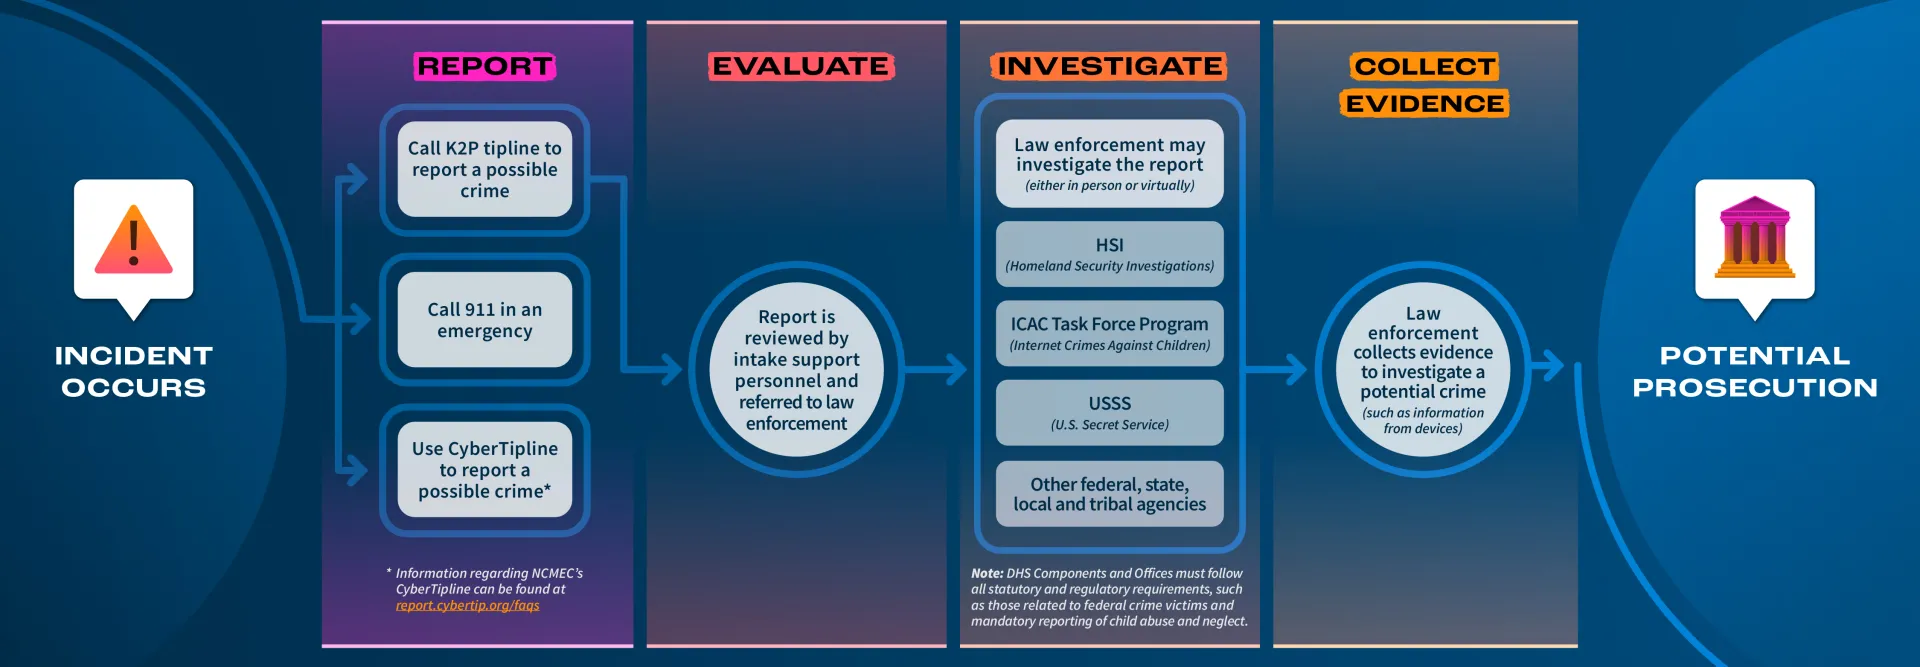 Workflow example and steps for what happens after a report. Incident Occurs; Report (with examples of how to report like using the K2P tipline or callign 911); Document (report reviewed and referred to law enforcement); Investigate (law enforcement may investigate the report); Collect Evidence (evidence is collected by law enforcement to investigate the potential crimve); Potential Prosecution